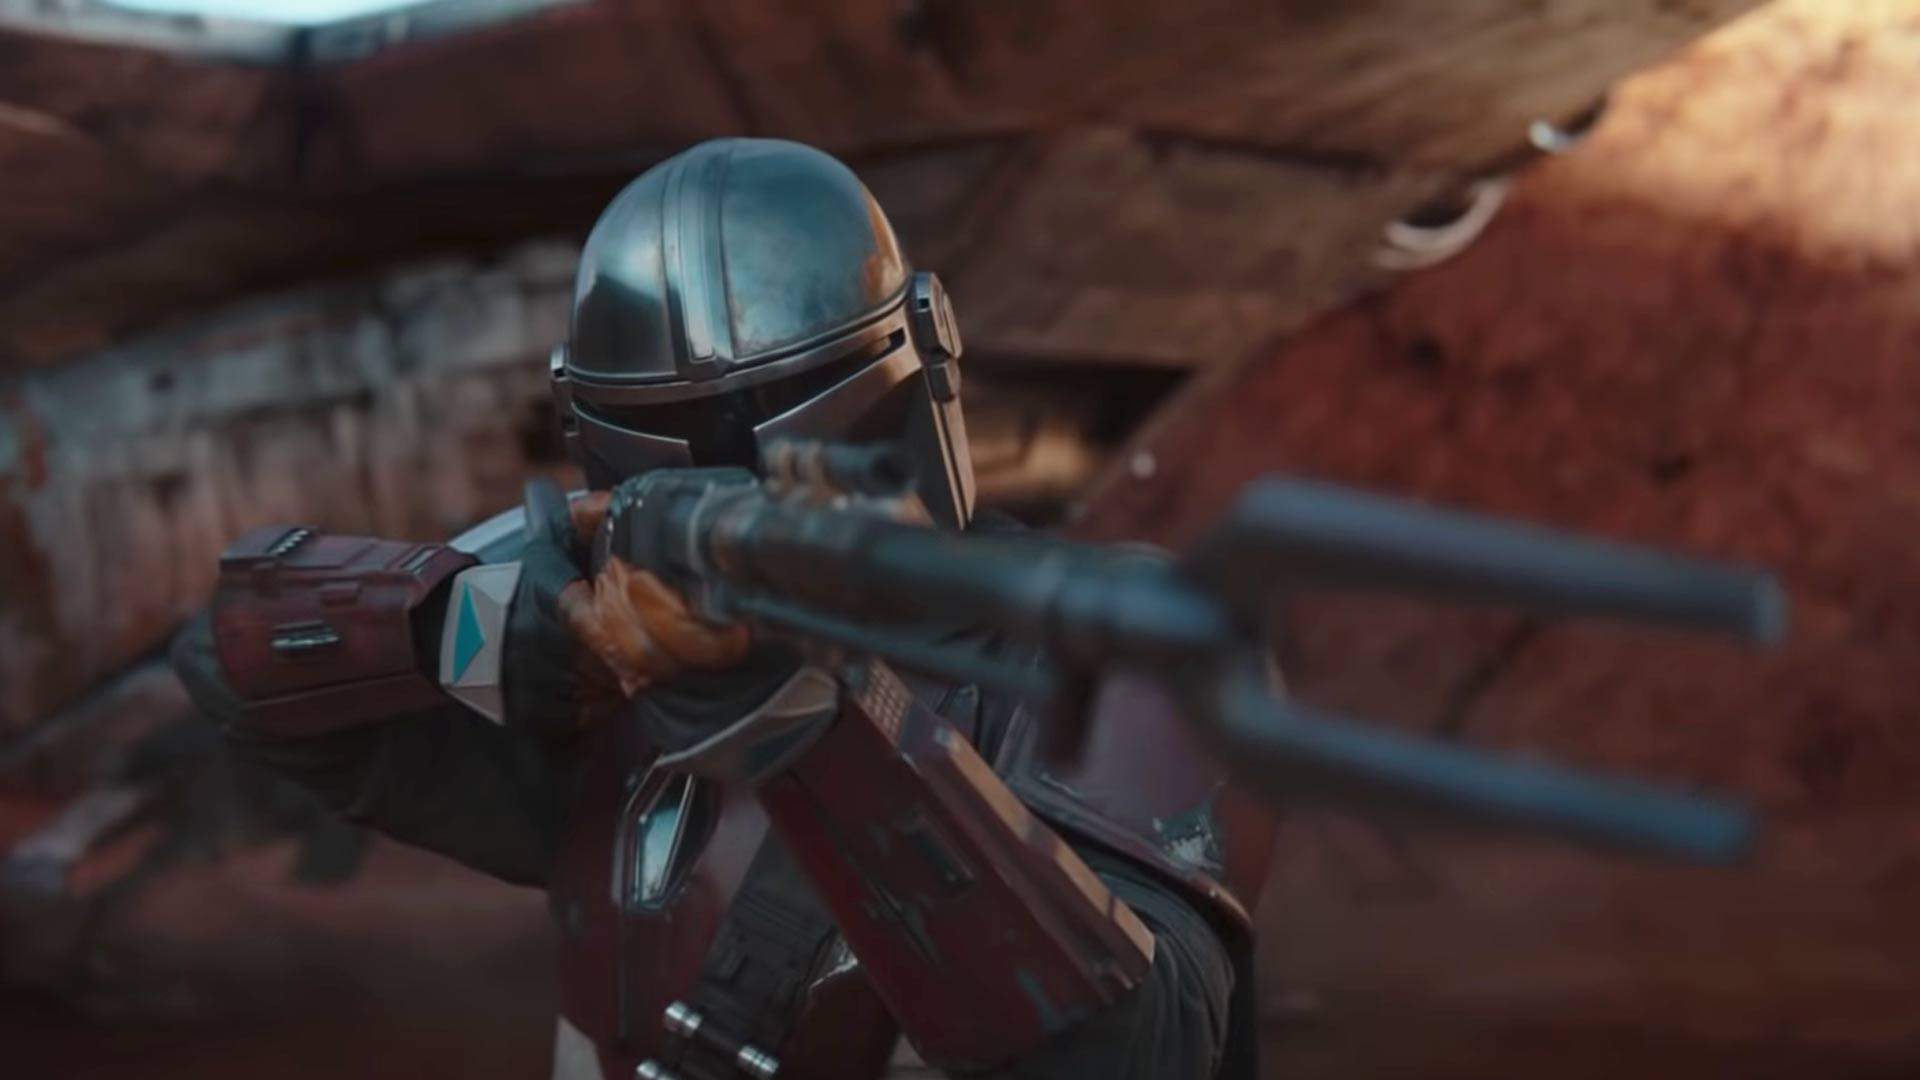 The New Trailer for Star Wars Series 'The Mandalorian' Delivers Space Battles and Bounty Hunters